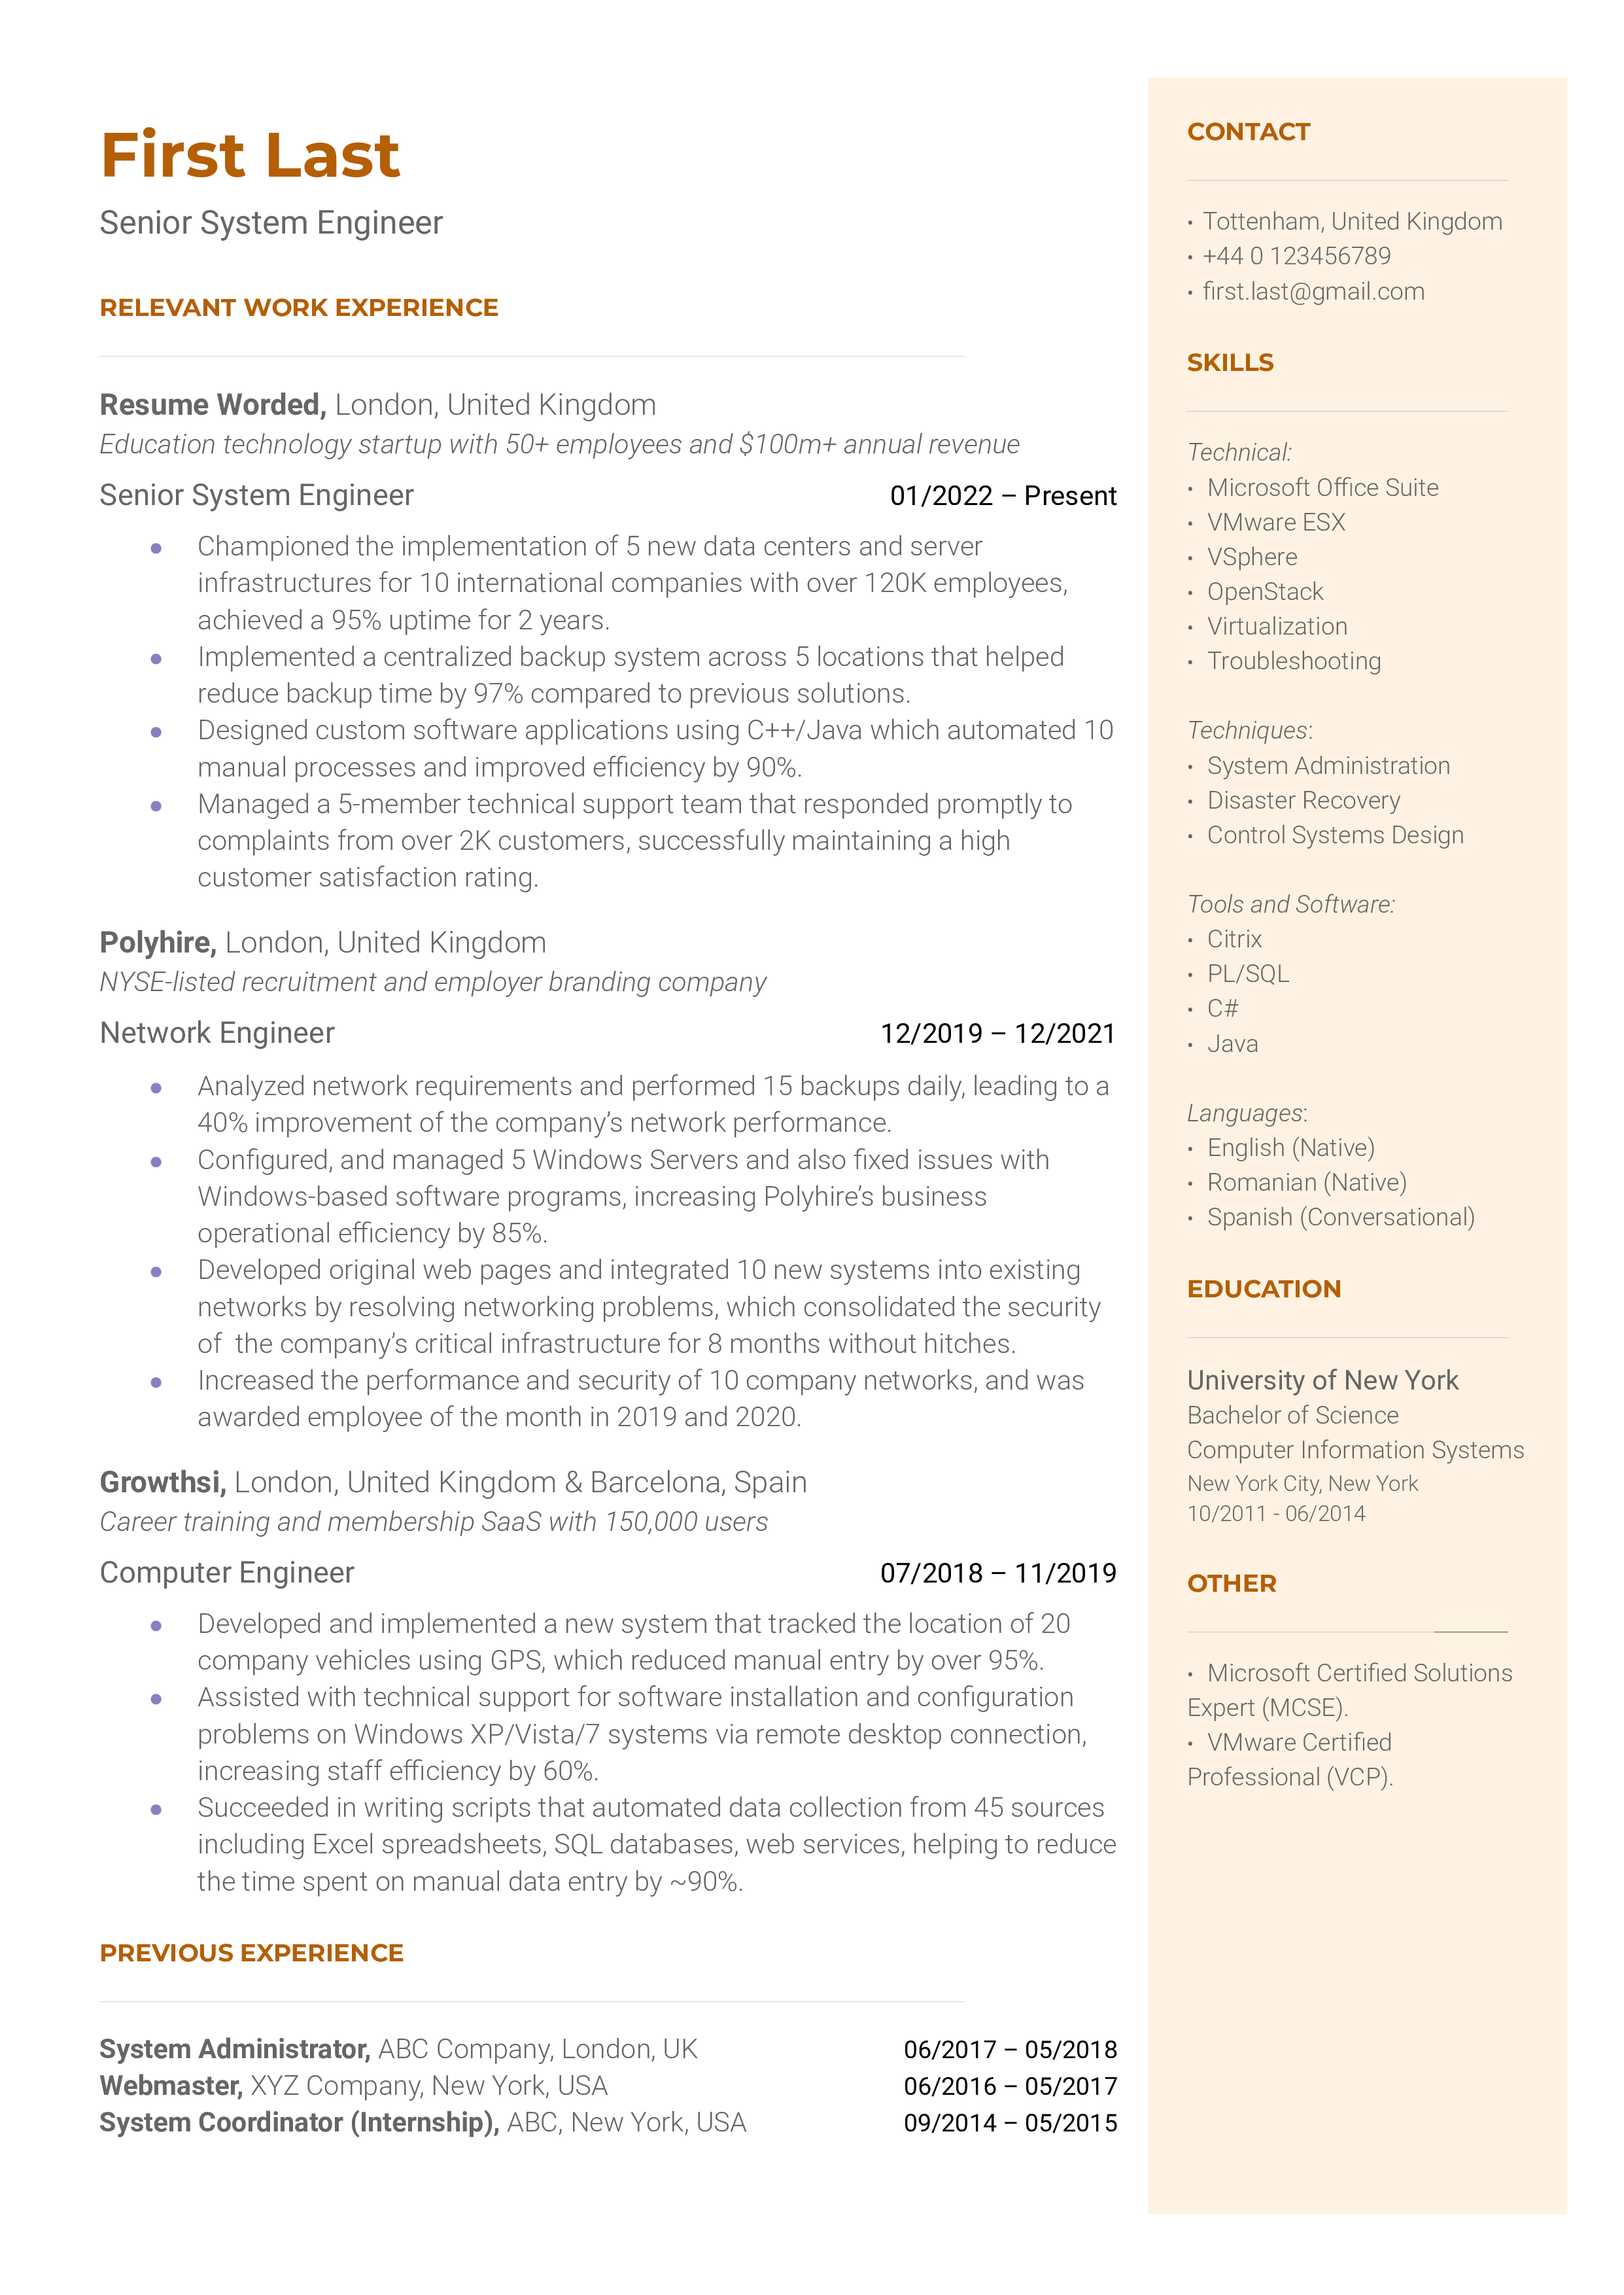 A resume template that includes relevant work experience, education, and additional information 